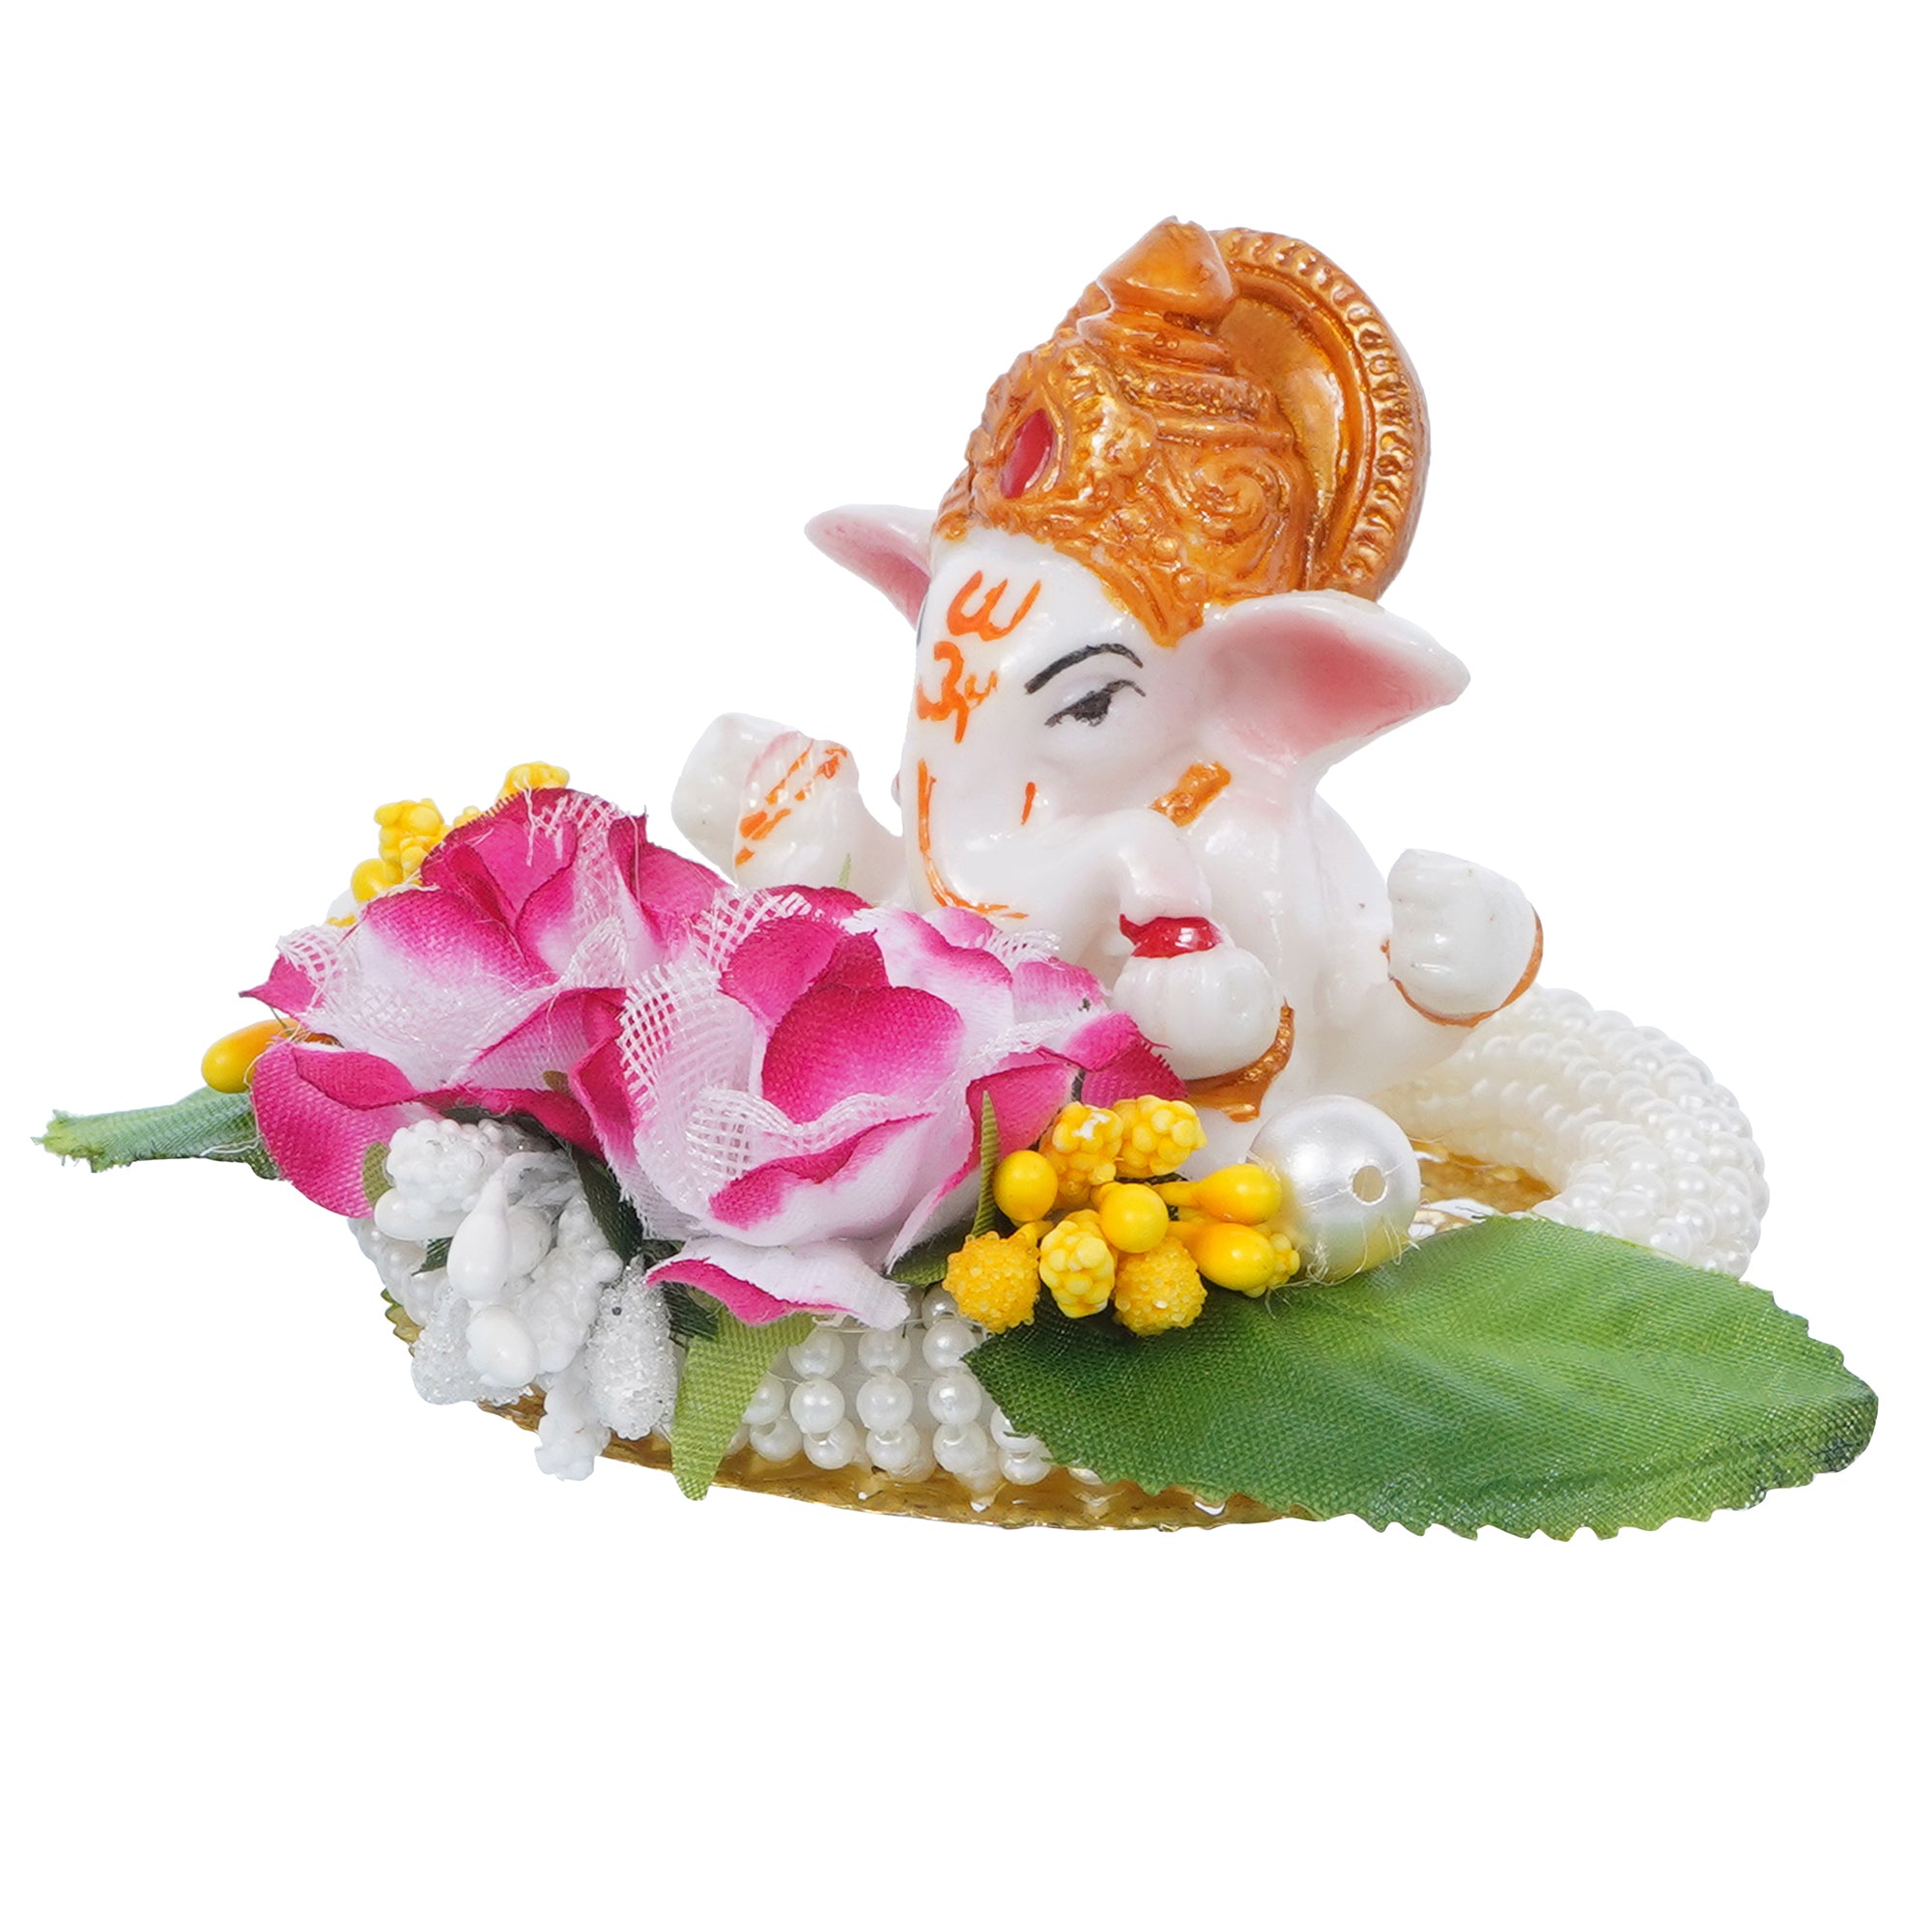 Lord Ganesha Idol on Decorative Handcrafted Plate with Colorful Flowers and Leaf 5